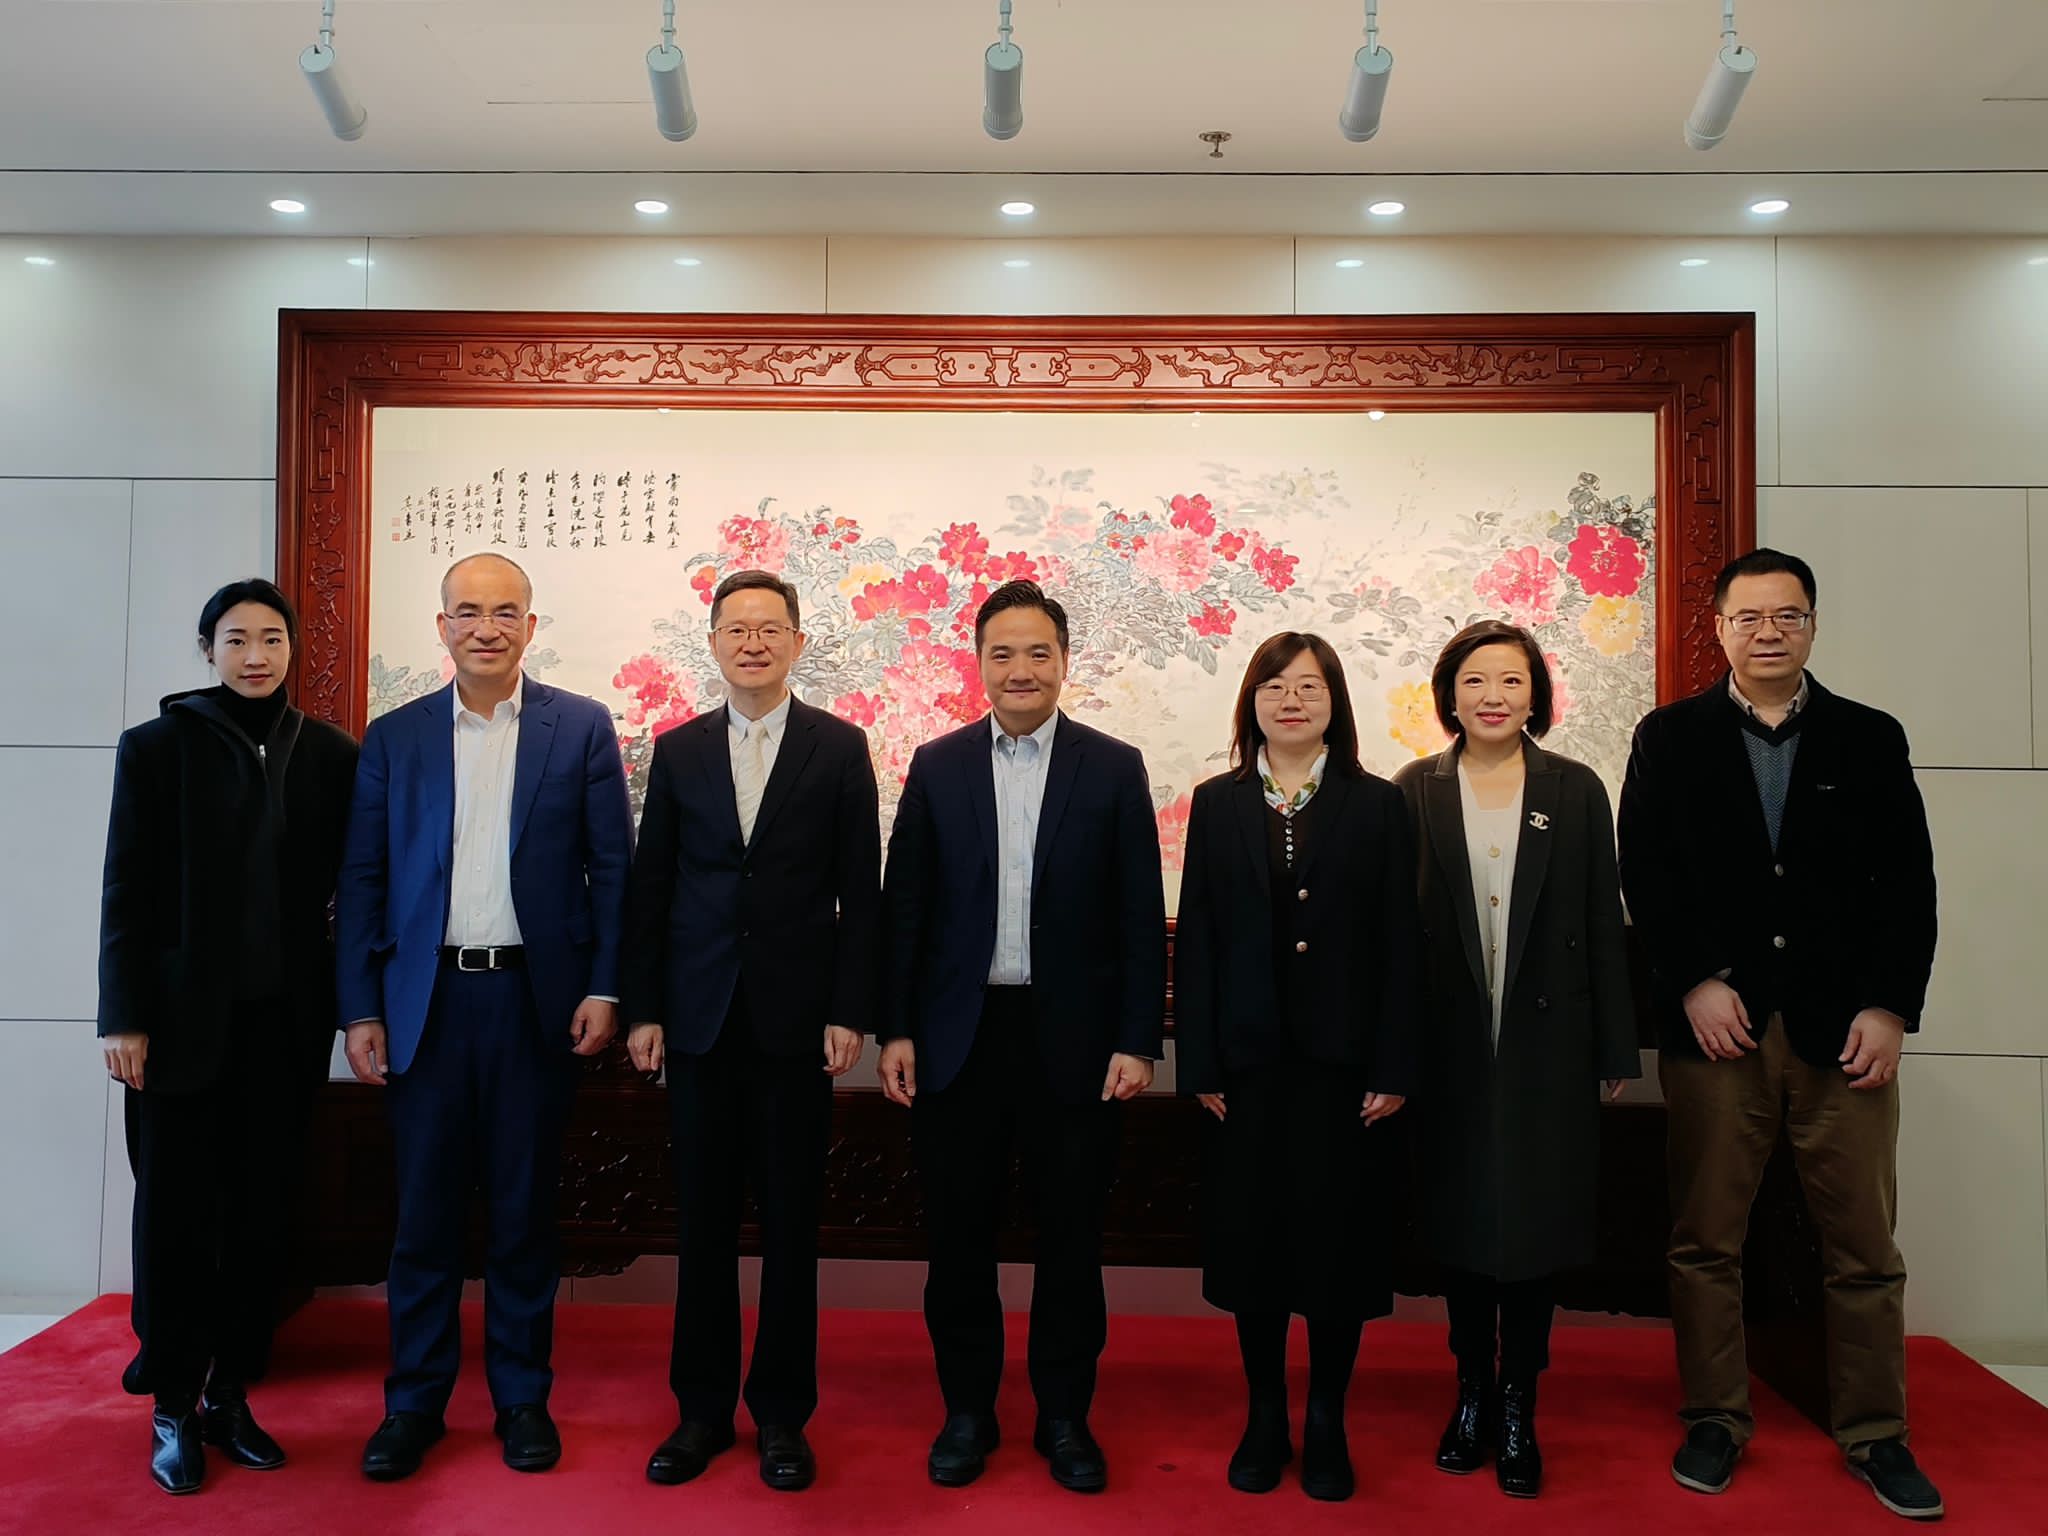 Dr Stephen Wong, Head of the CEPU, Dr Wang Chunxin, Deputy Head of the CEPU, and research colleagues visited the Ministry of Culture and Tourism.